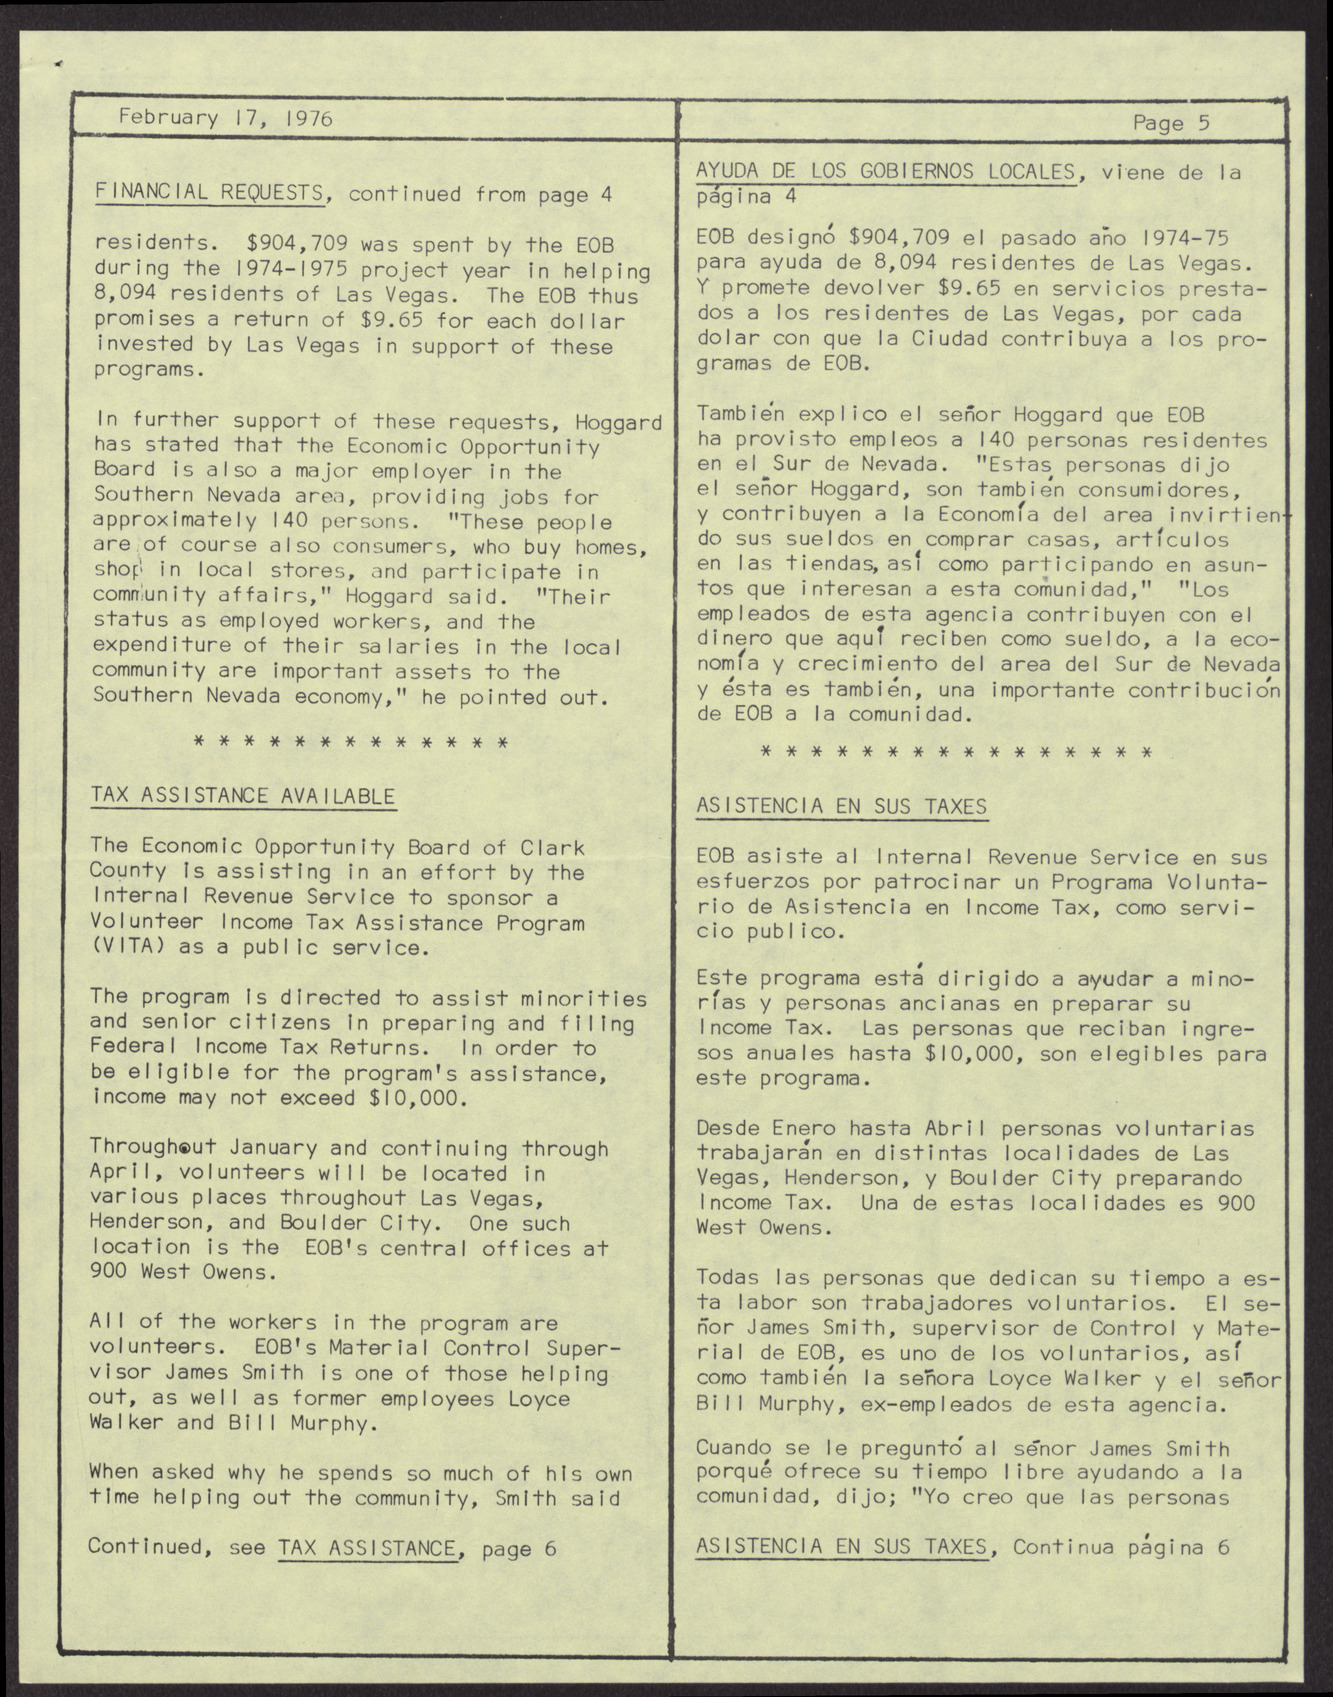 EOB Bulletin newsletter (12 pages), February 17, 1976, page 5